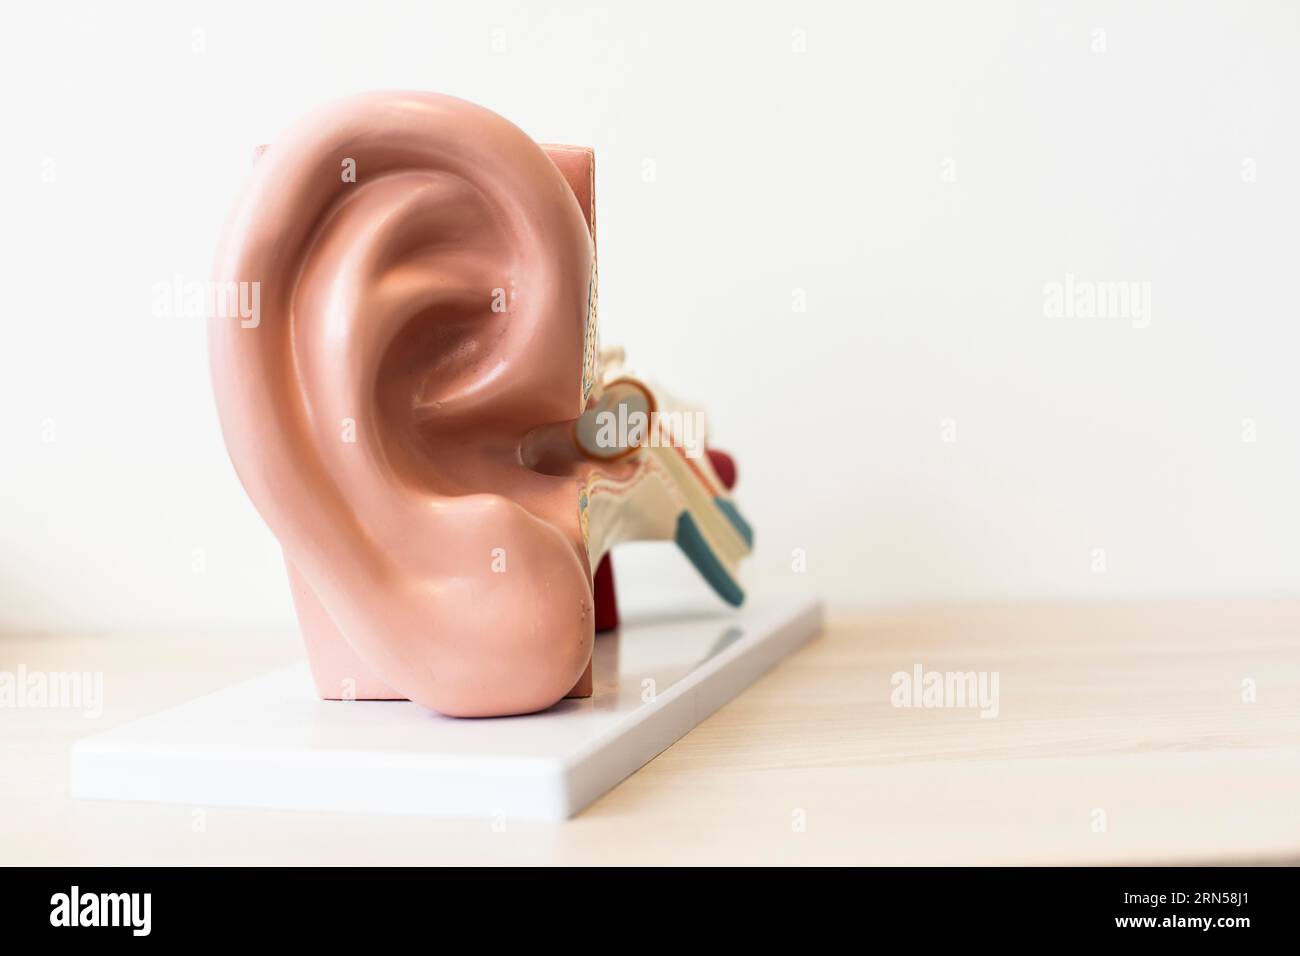 Model of a human ear against a neutral background Stock Photo